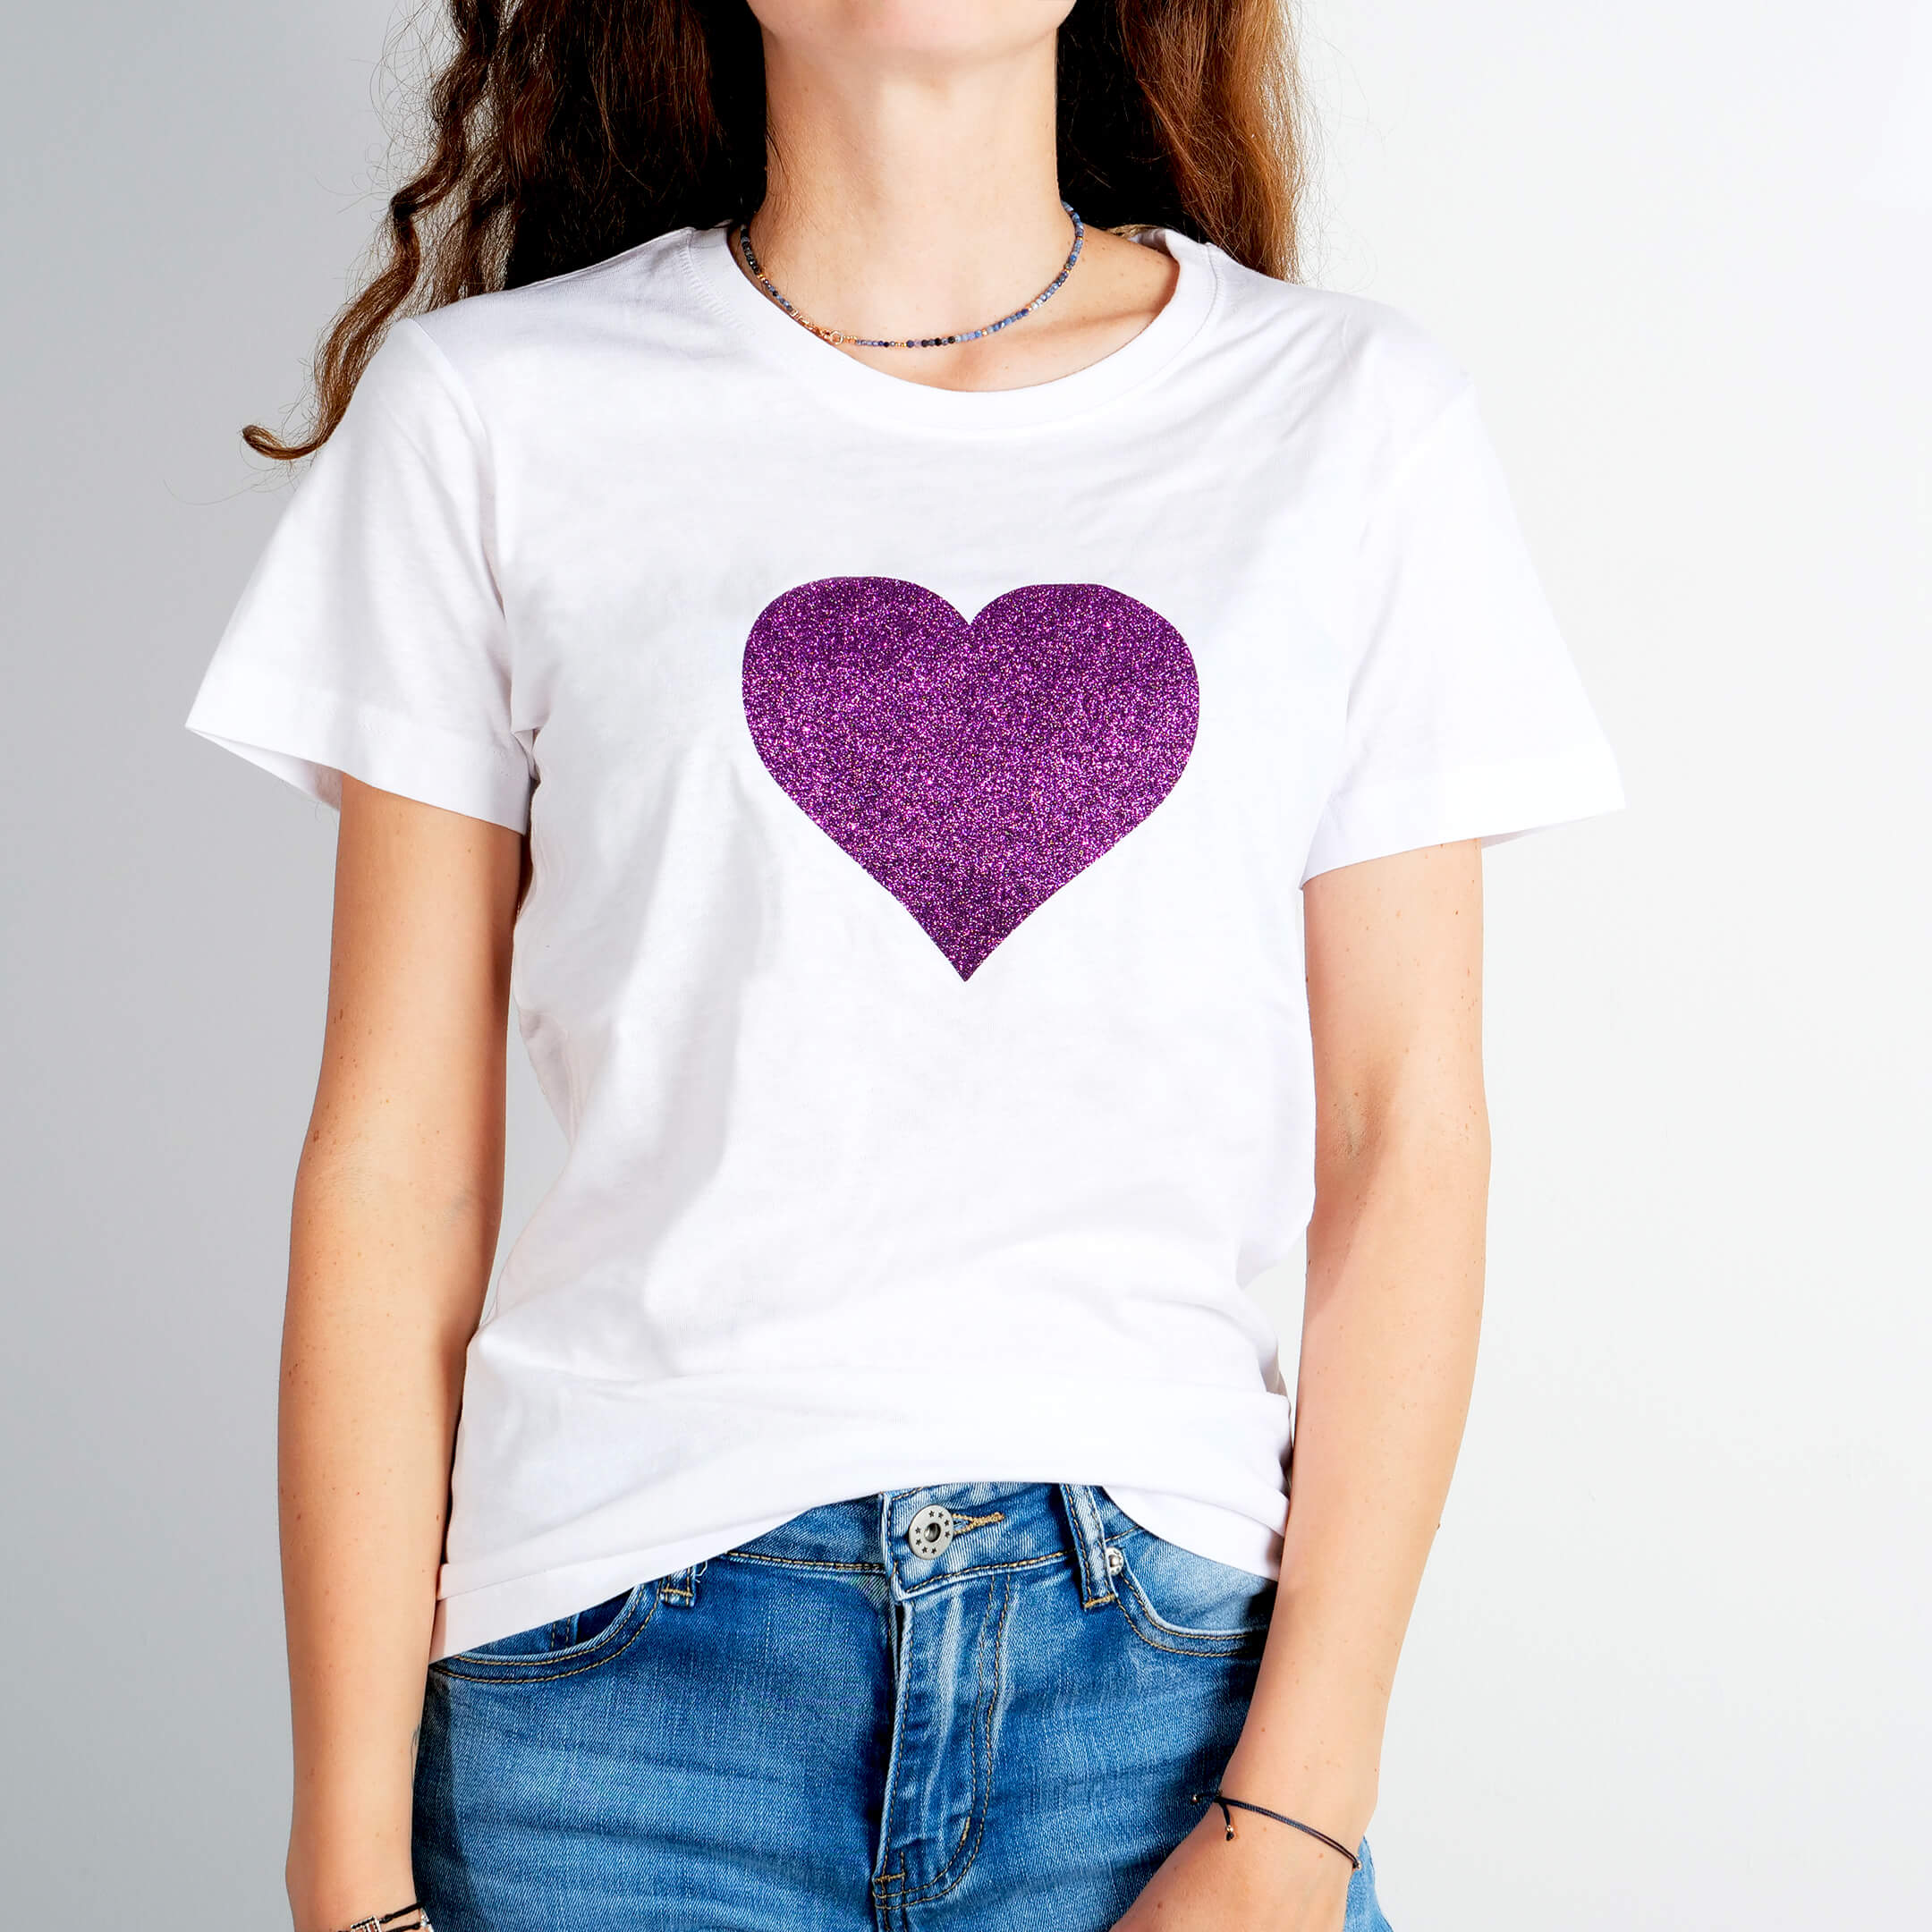 T-shirt Cuore